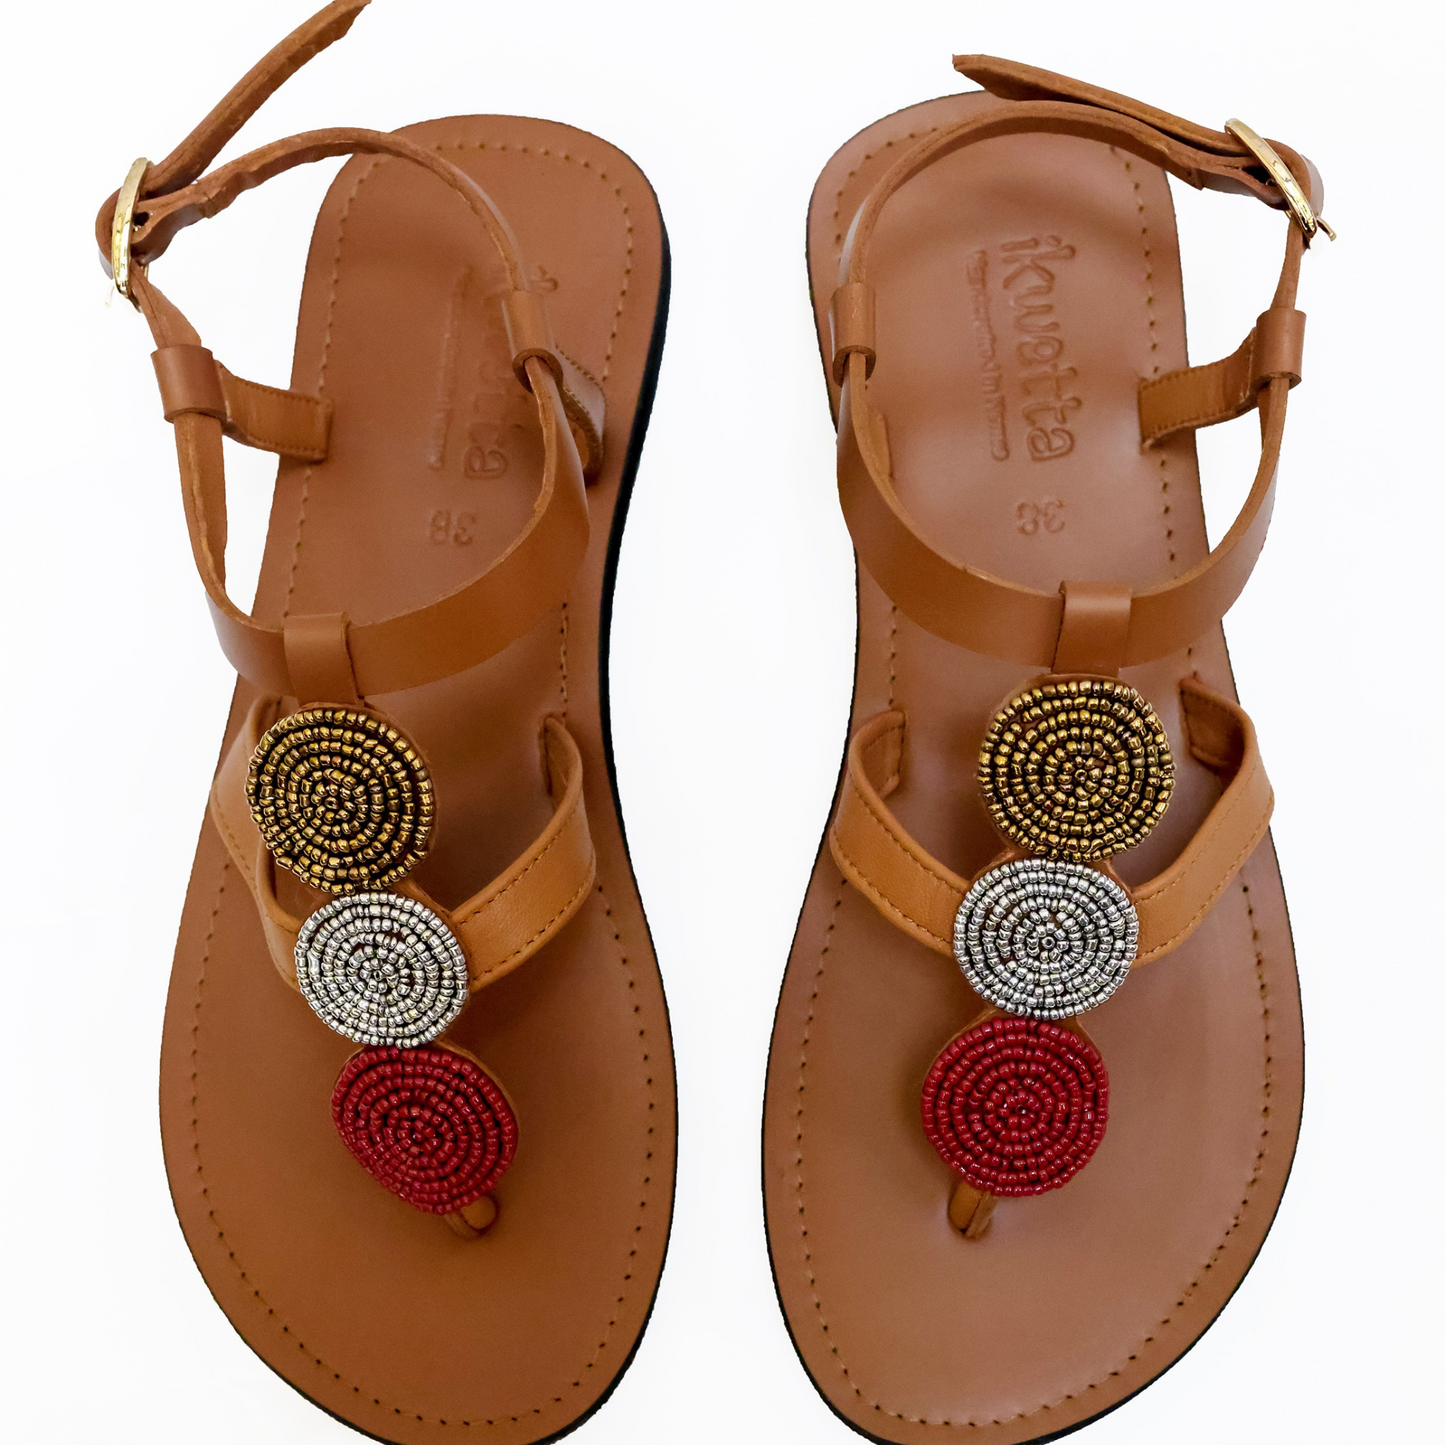 Naivasha sandals in caramel smooth leather, beaded strap and rubber sole.